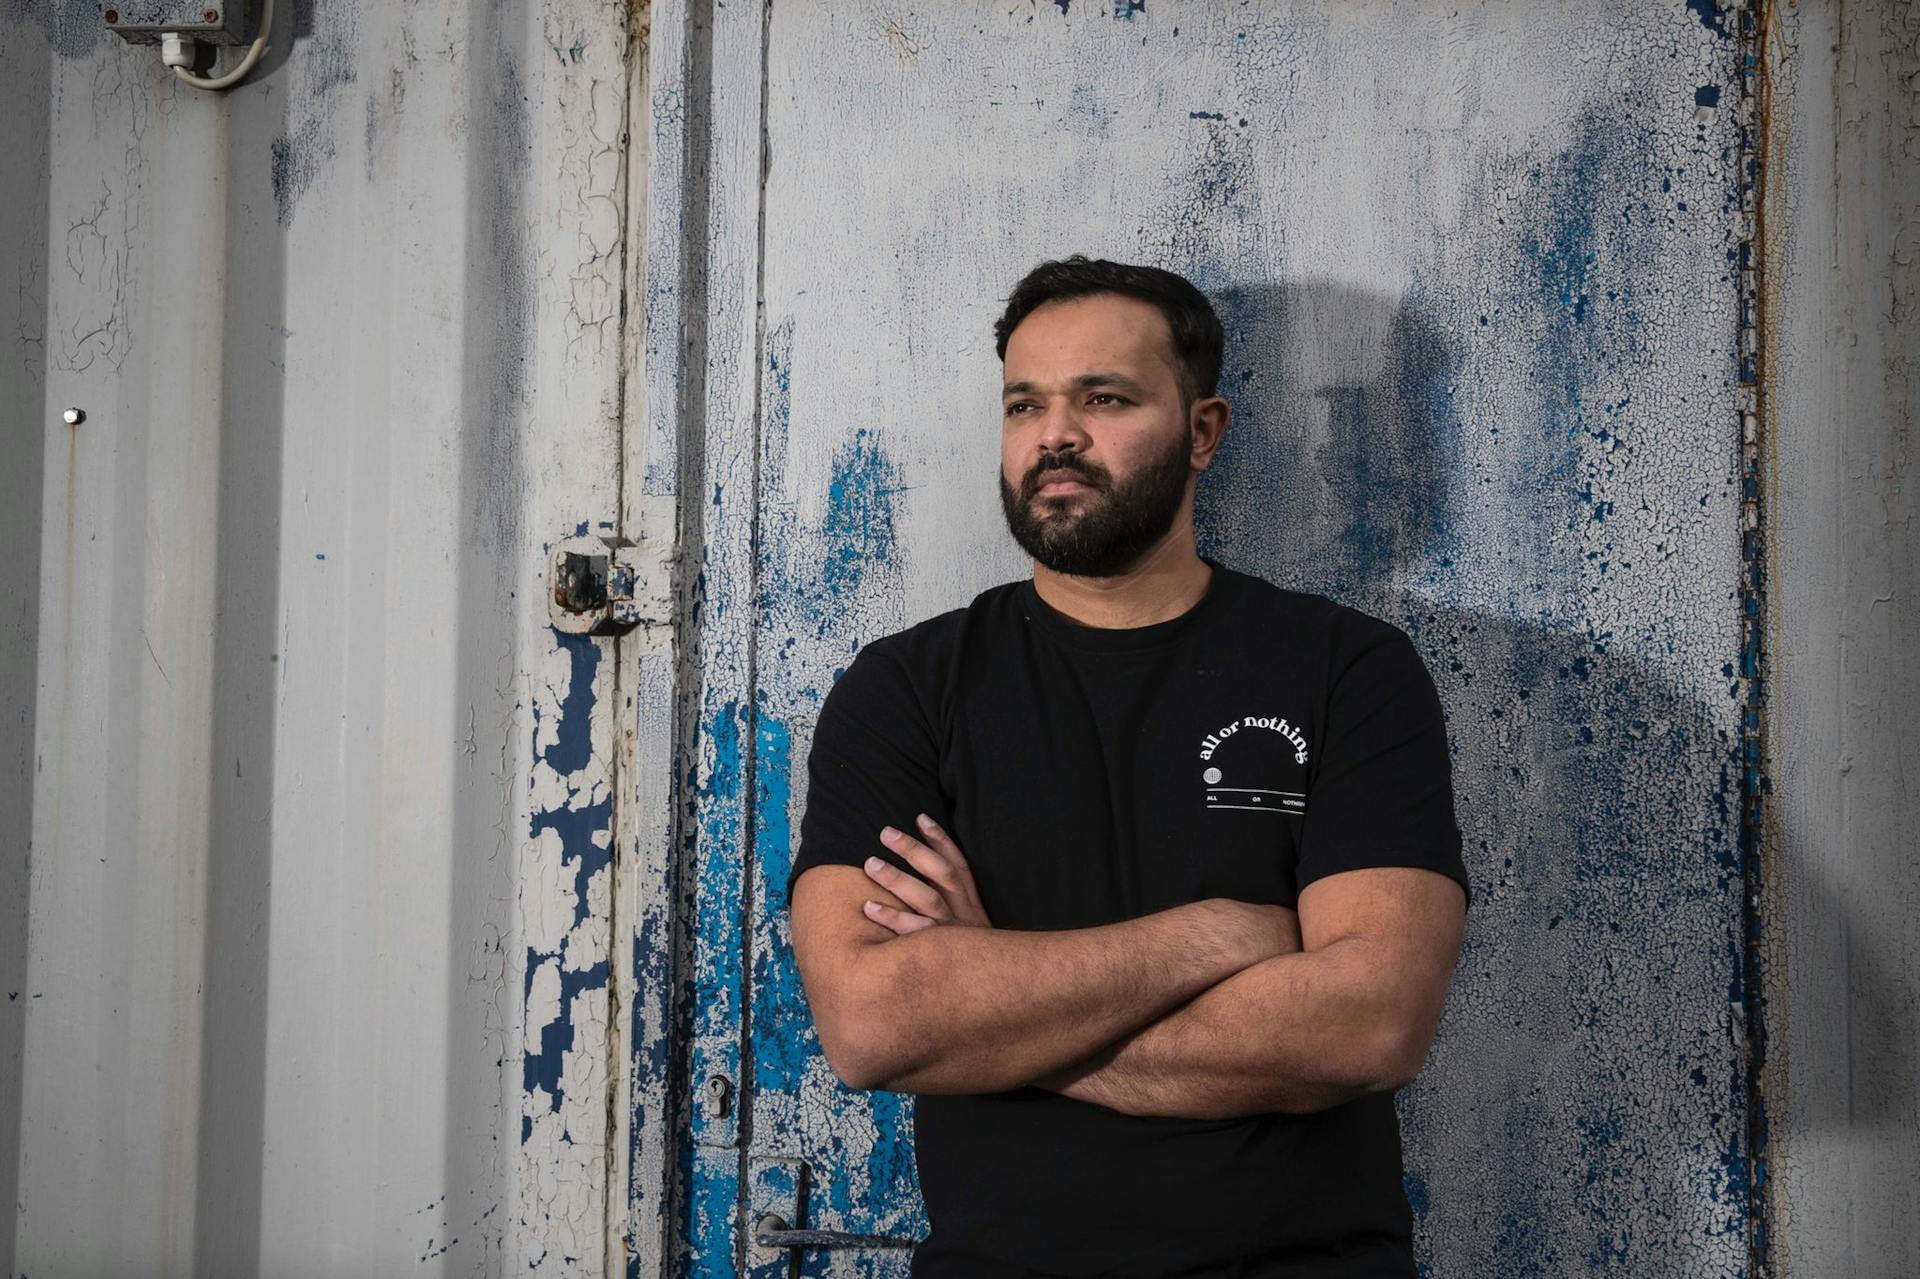 Azeem Rafiq: My battle with racism, mental health and personal tragedy, and how I found hope again